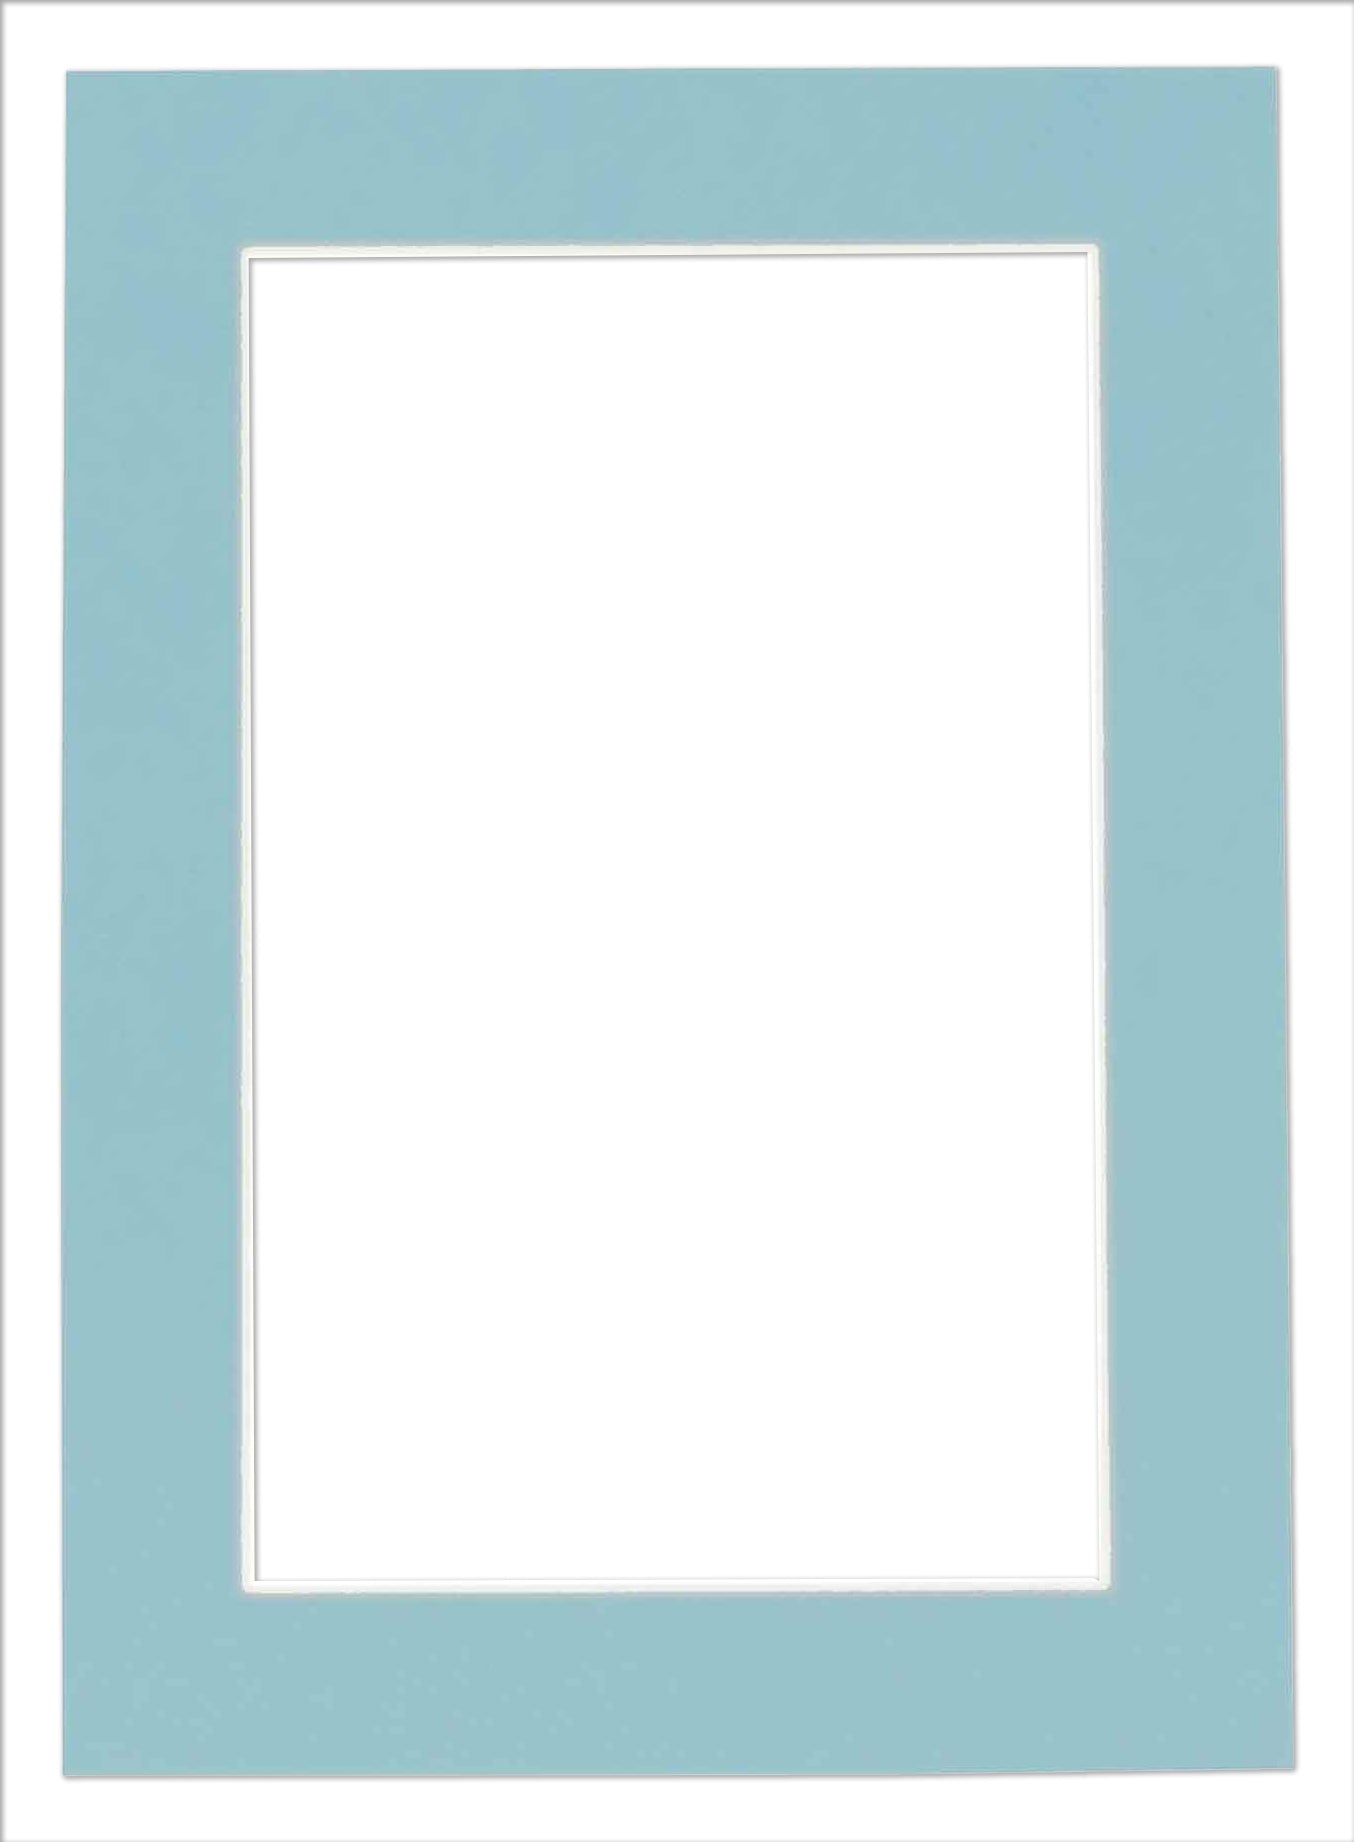  18x24 Mat for 13x19 Photo - Precut Teal Blue Picture